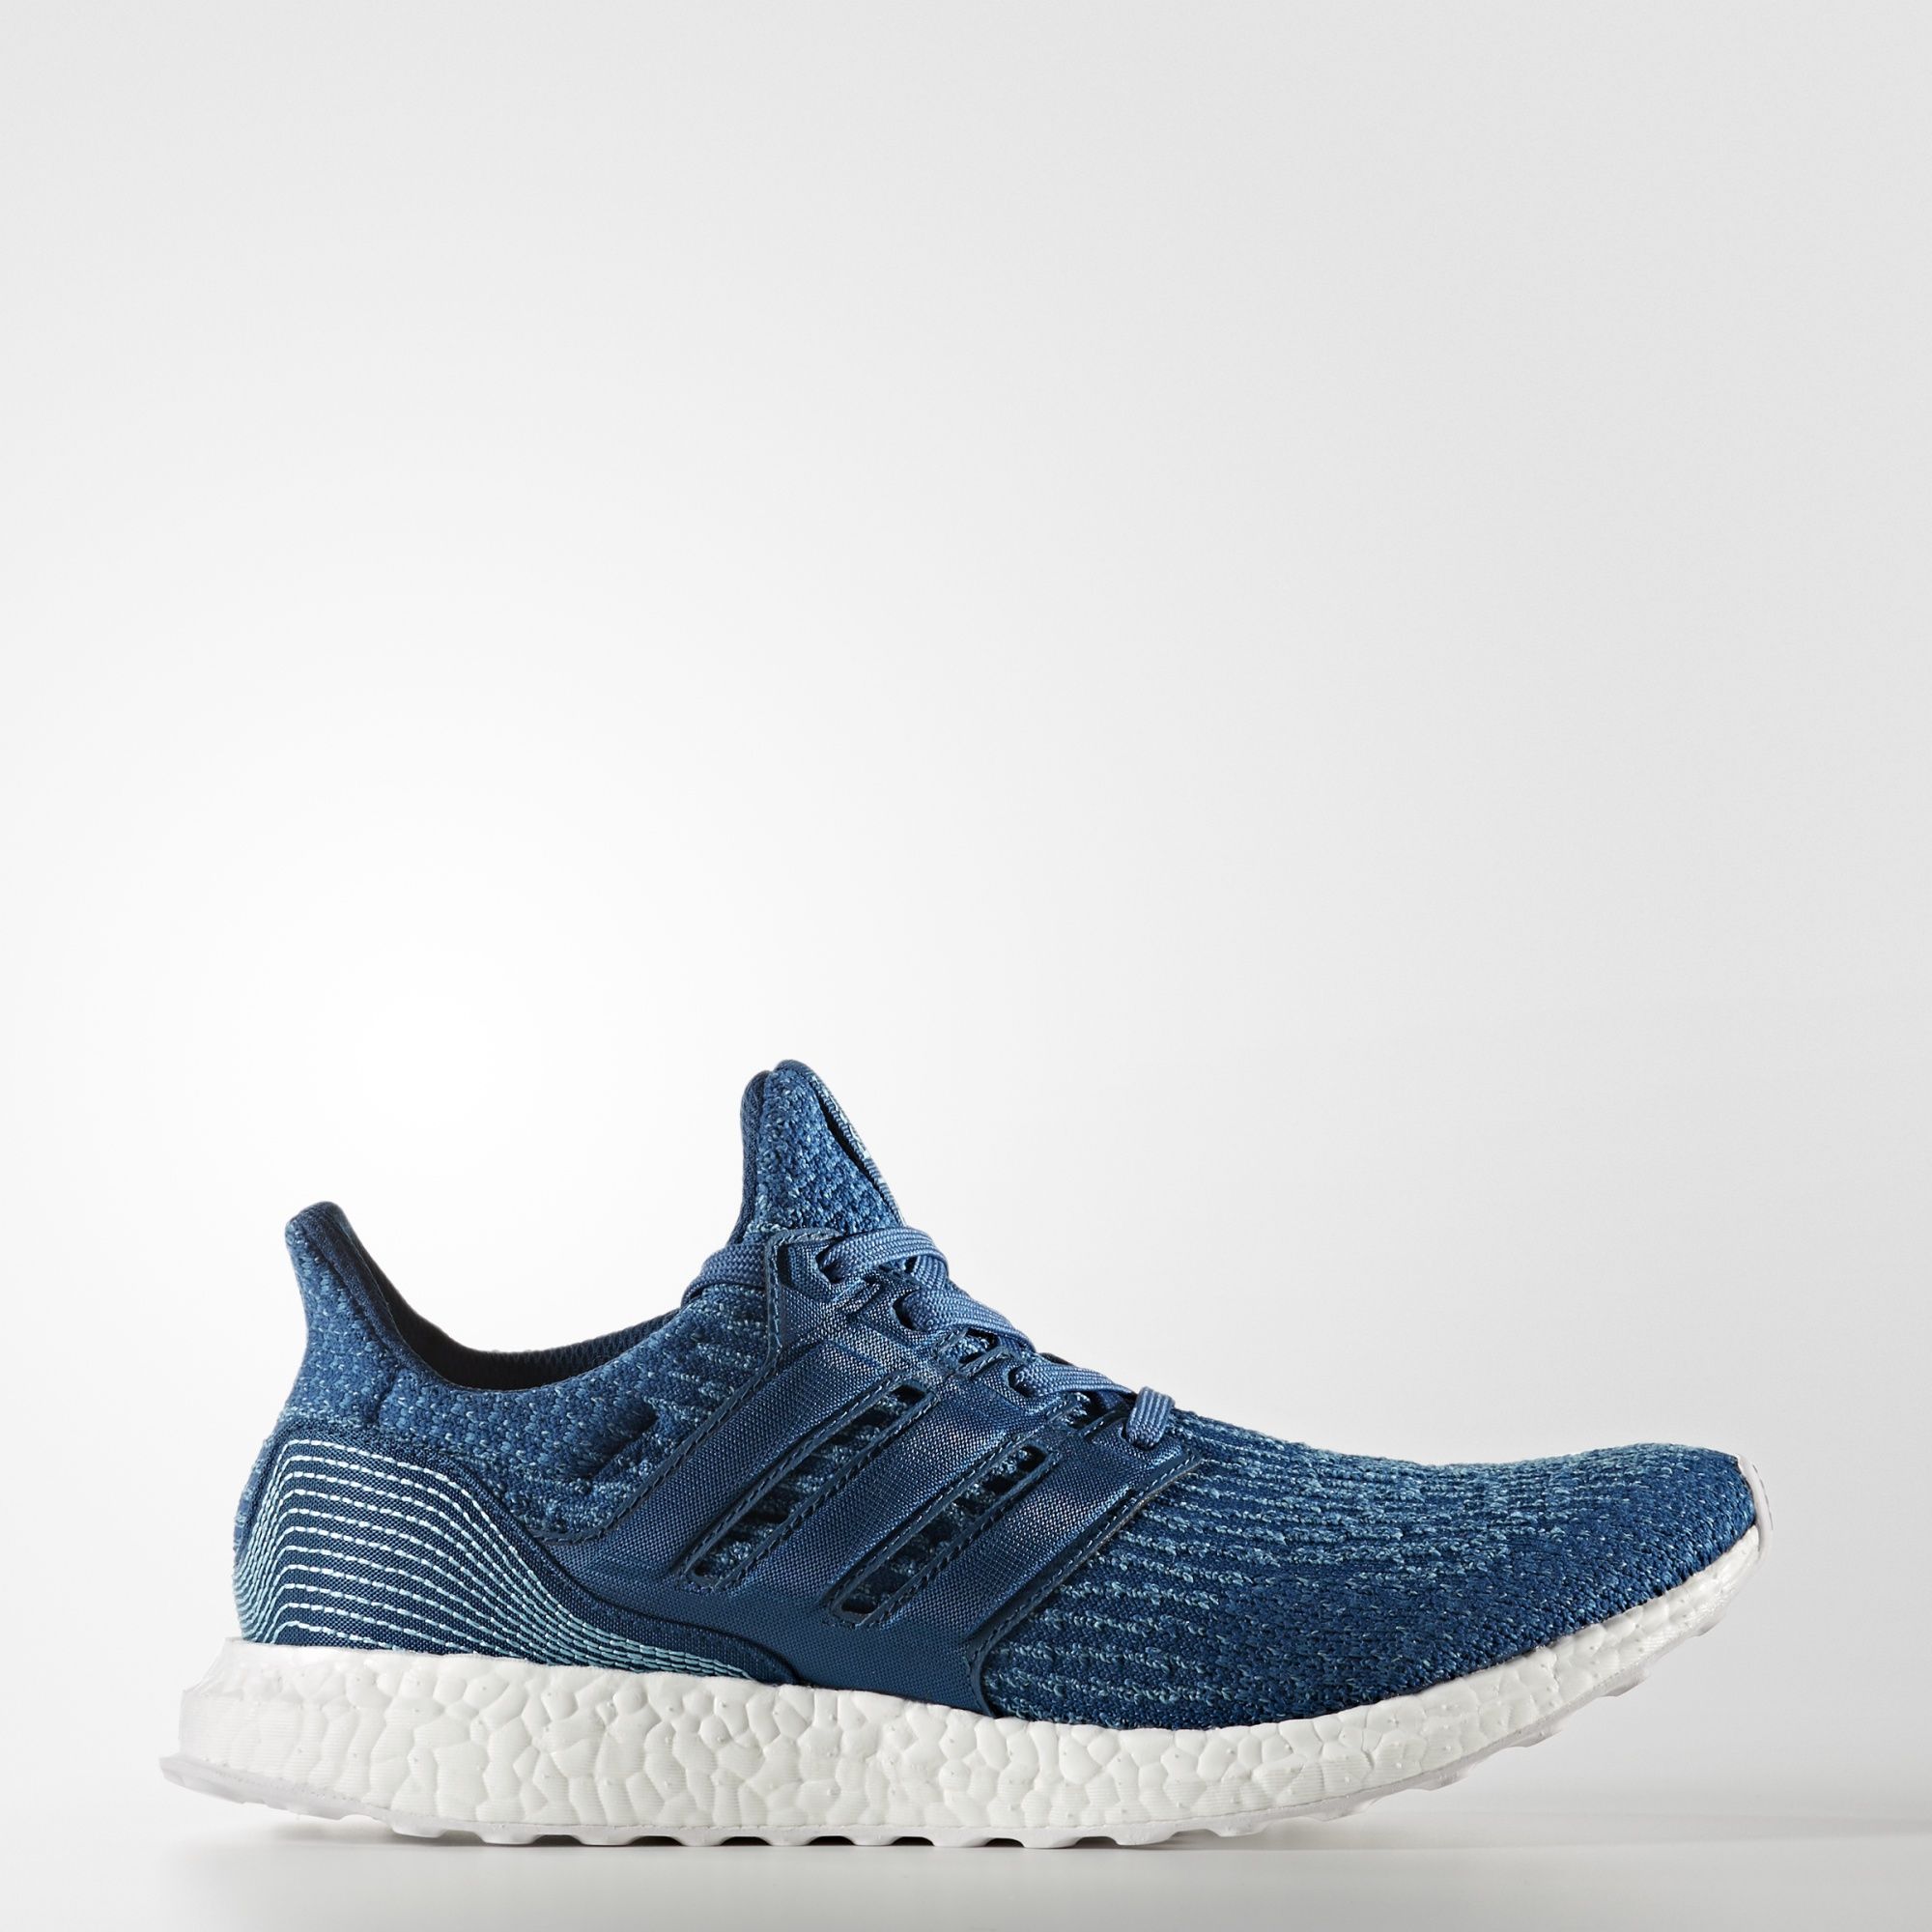 Adidas Ultra Boost Parley
Blue / White